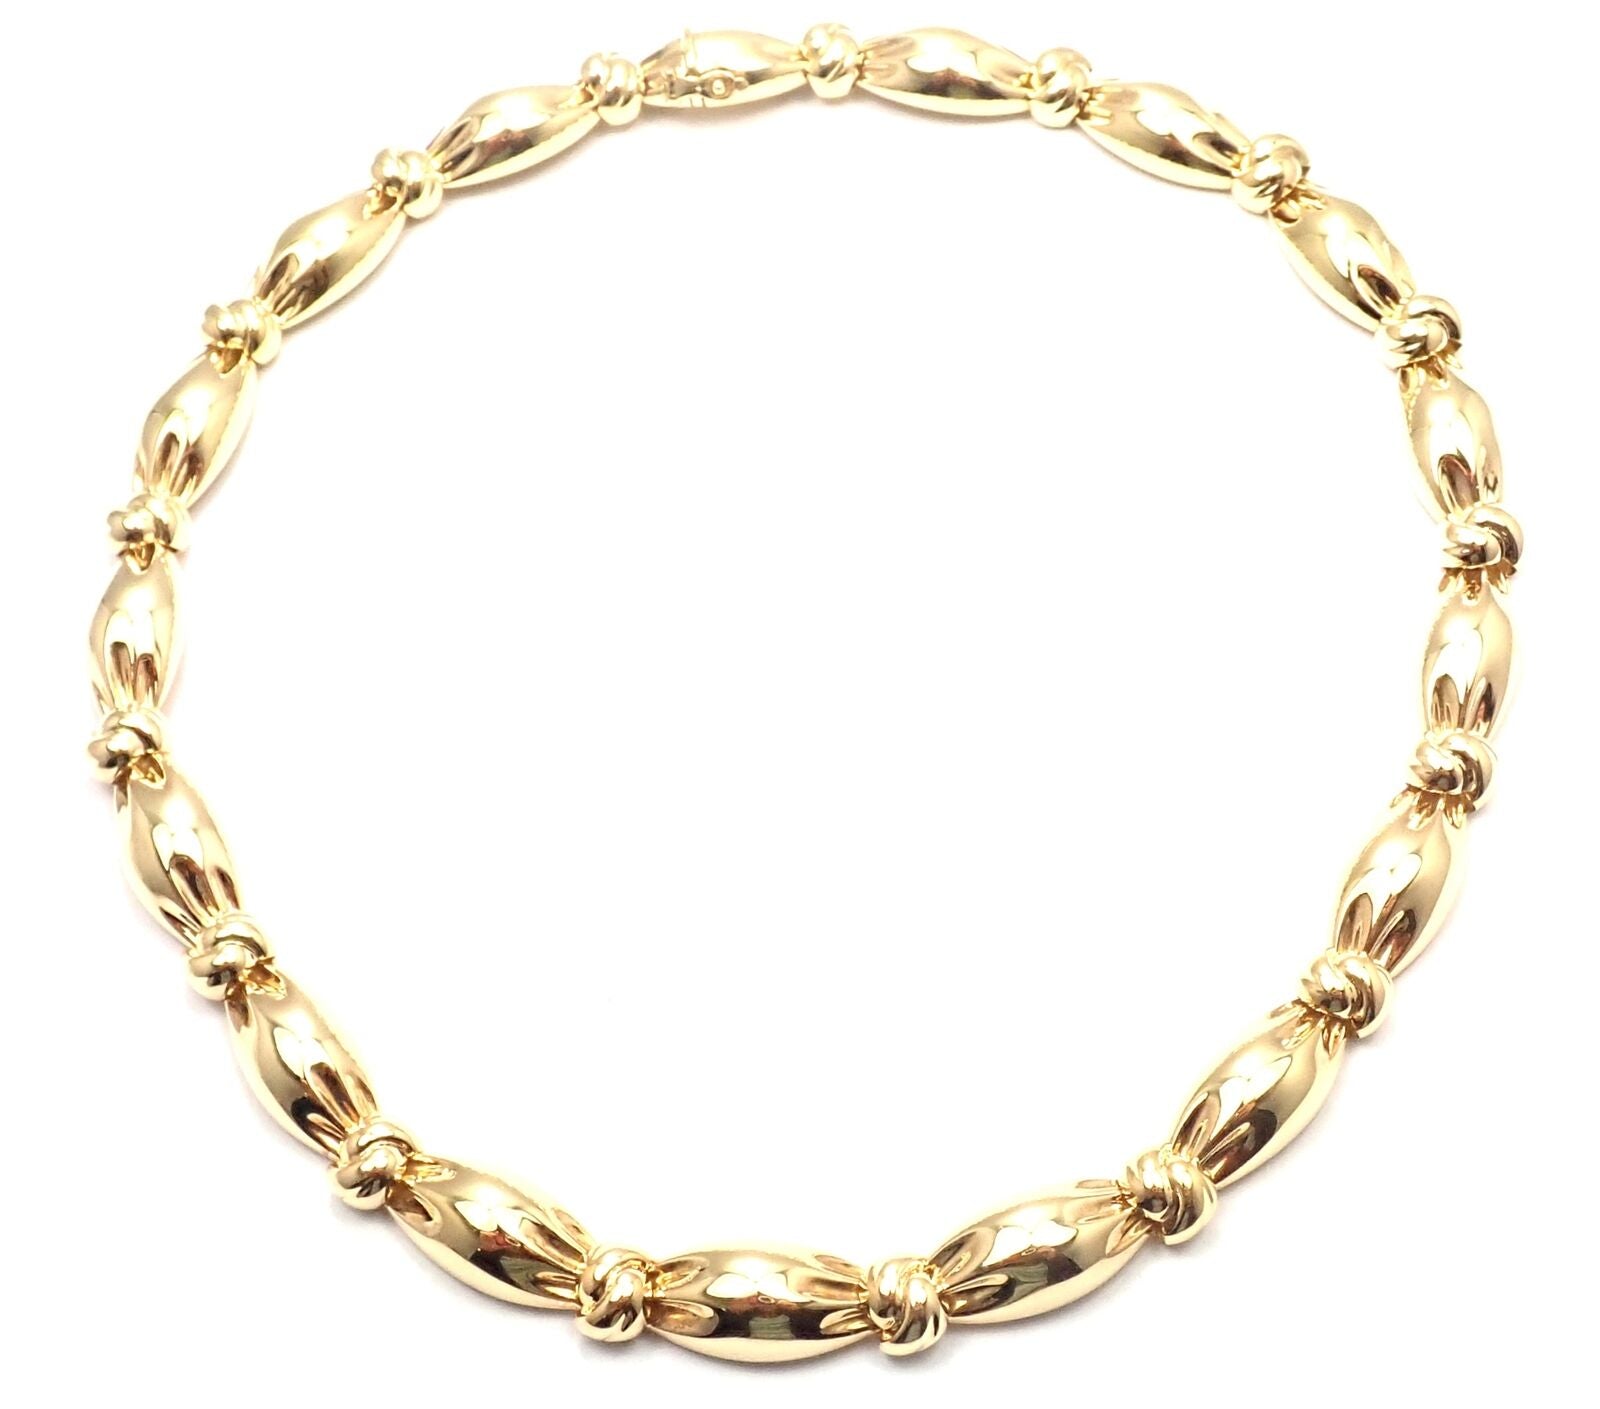 Van Cleef & Arpels Jewelry & Watches:Fine Jewelry:Necklaces & Pendants Rare! Authentic Van Cleef & Arpels 18k Yellow Gold Knotted Link Necklace